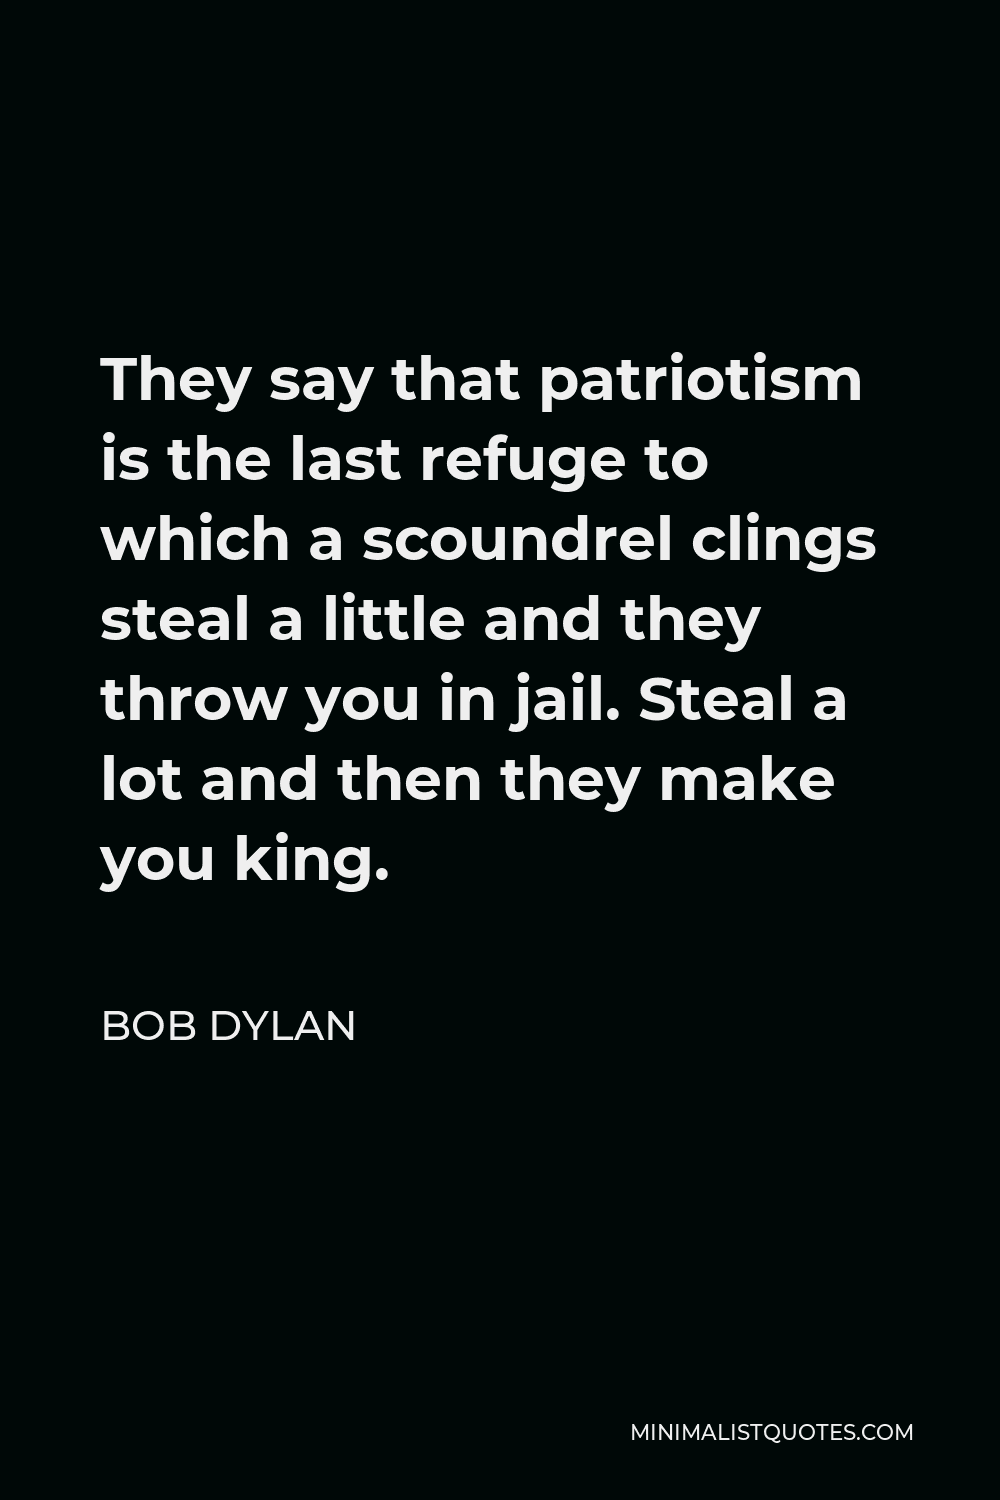 Bob Dylan Quote - They say that patriotism is the last refuge to which a scoundrel clings steal a little and they throw you in jail. Steal a lot and then they make you king.